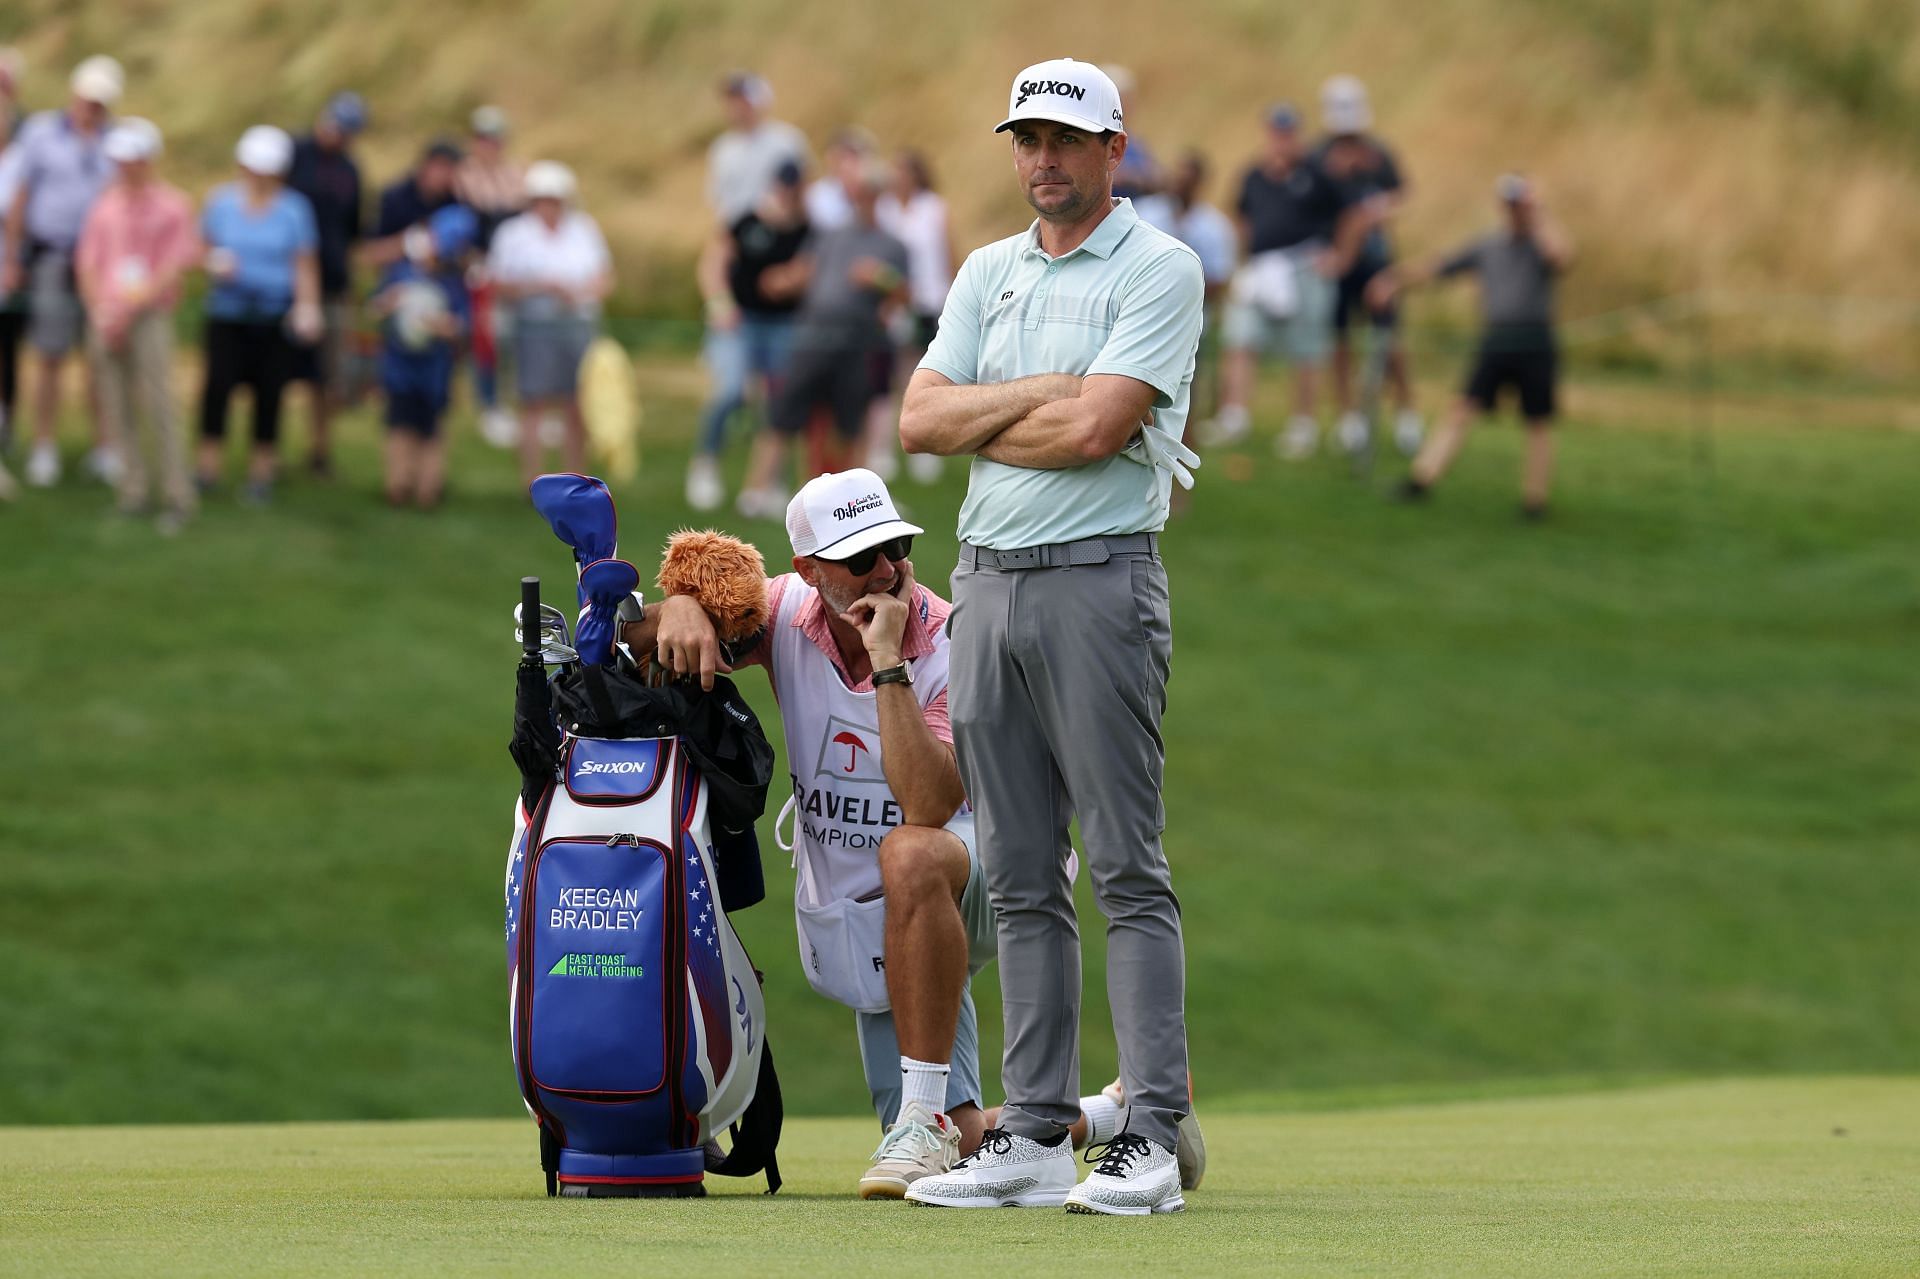 What is the relationship between Jordan Spieth and his caddy